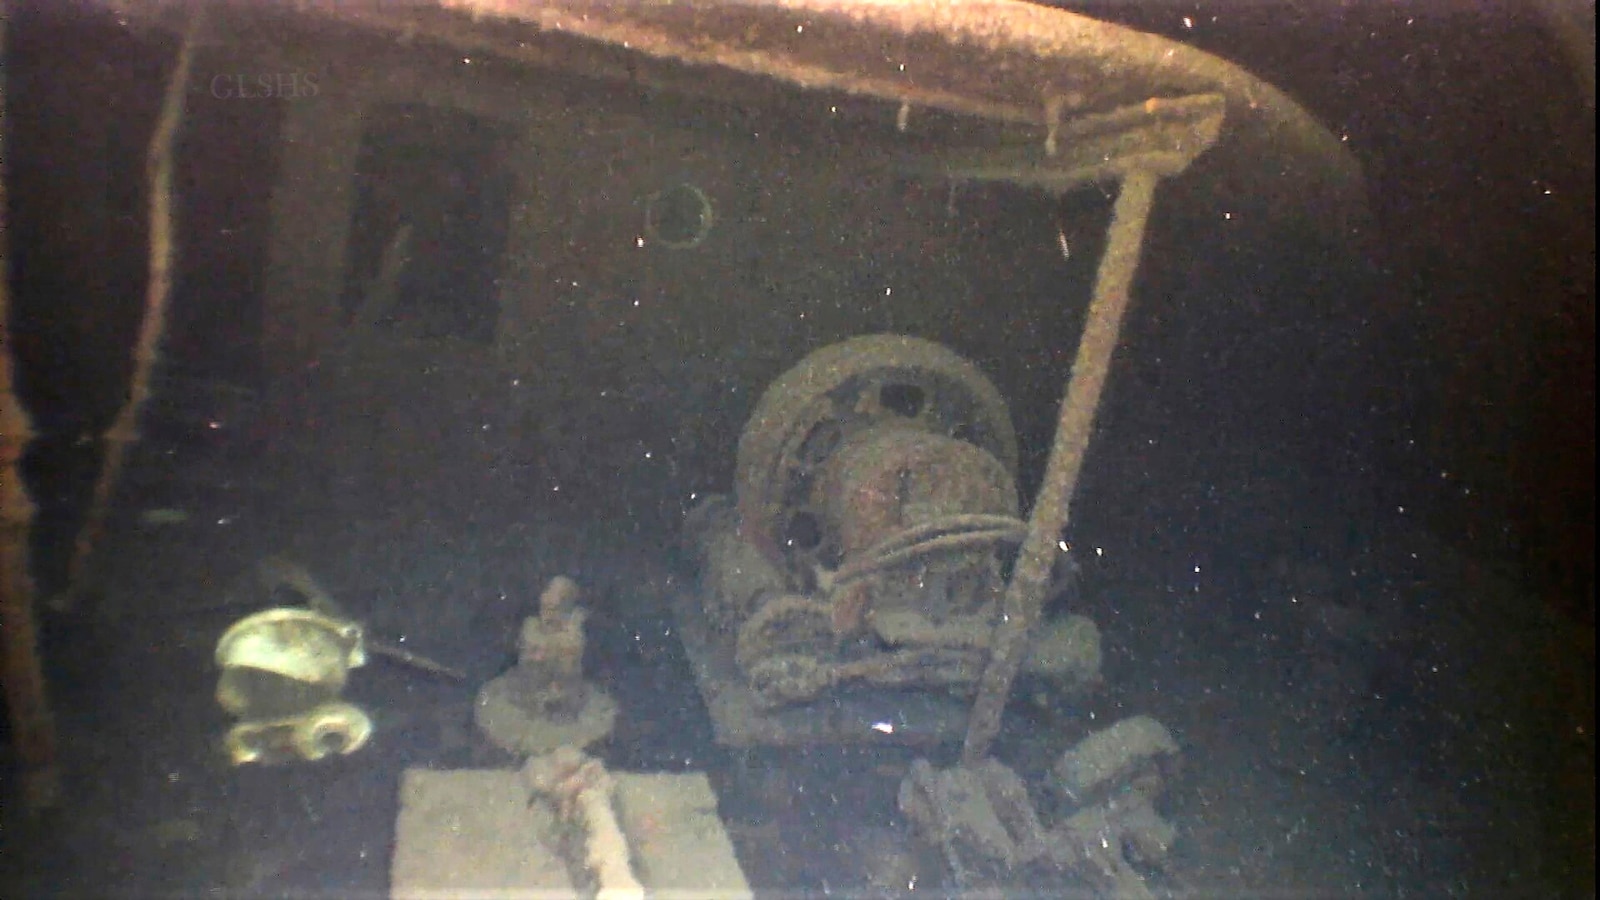 Shipwreck from 1940 discovered in Lake Superior